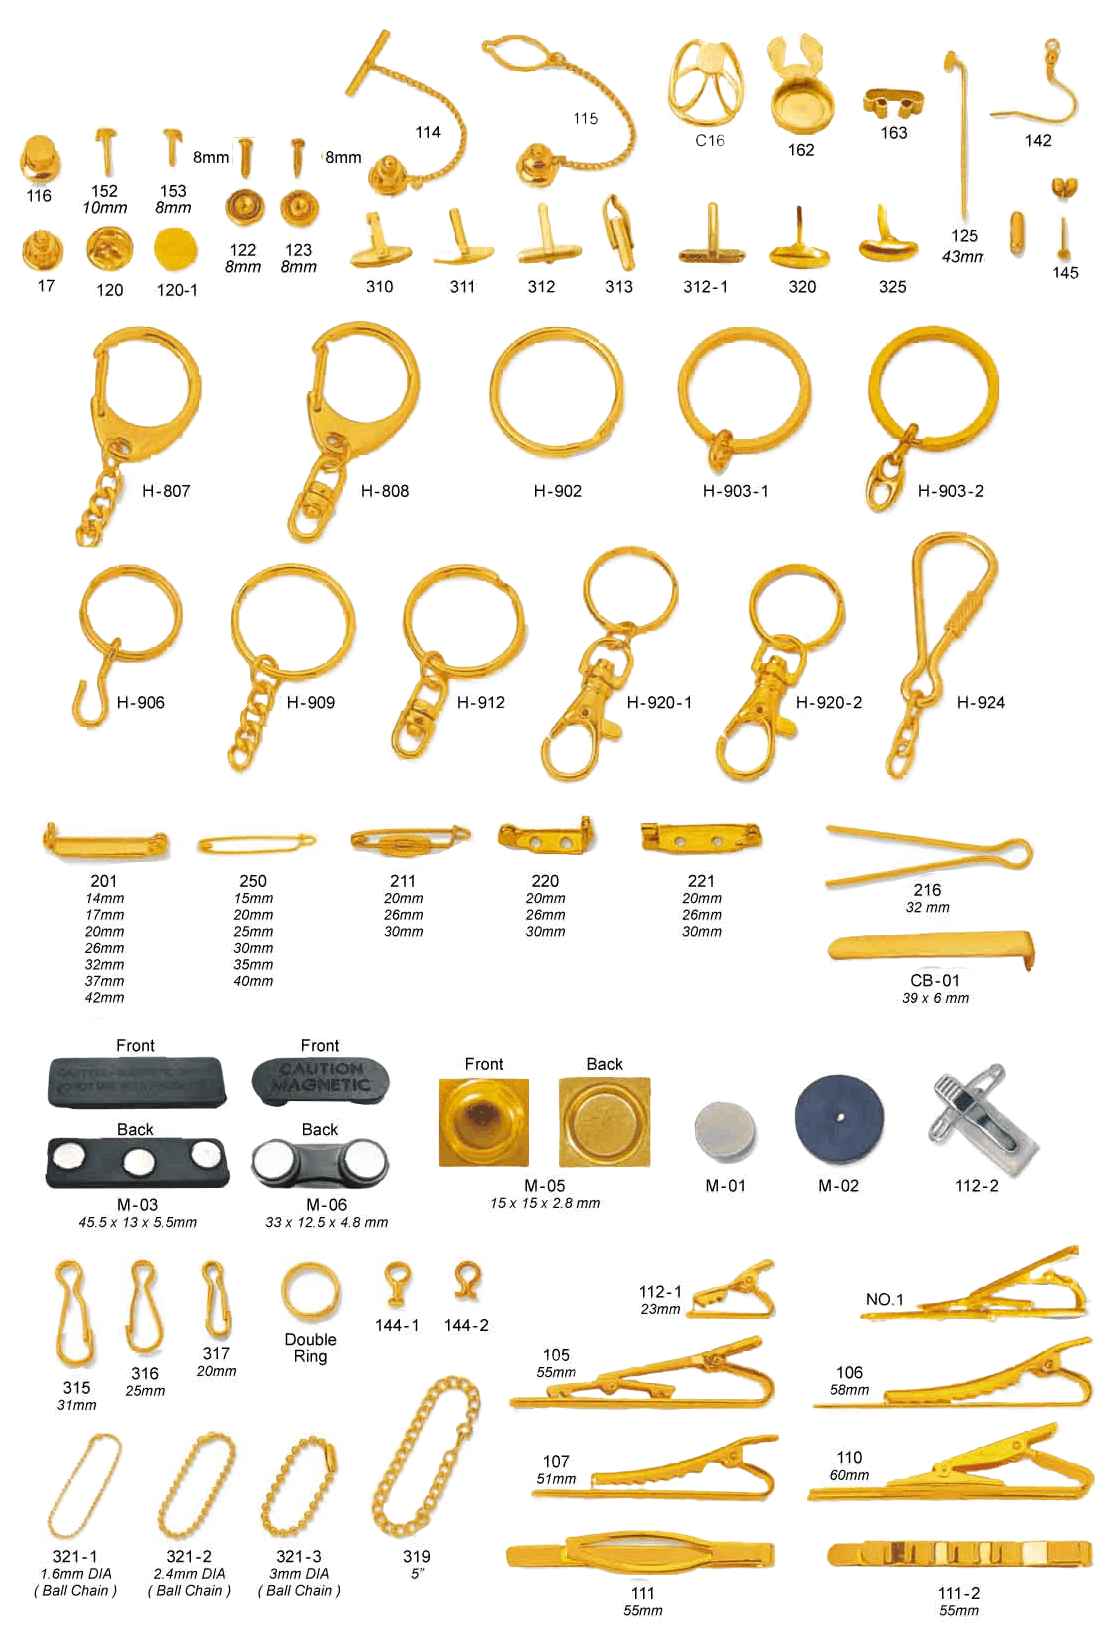 Metal accesories in various models, styles and plating. These include metal keyring accessories, tie bars, split rings, sealed rings, chains, and various metal clips. 